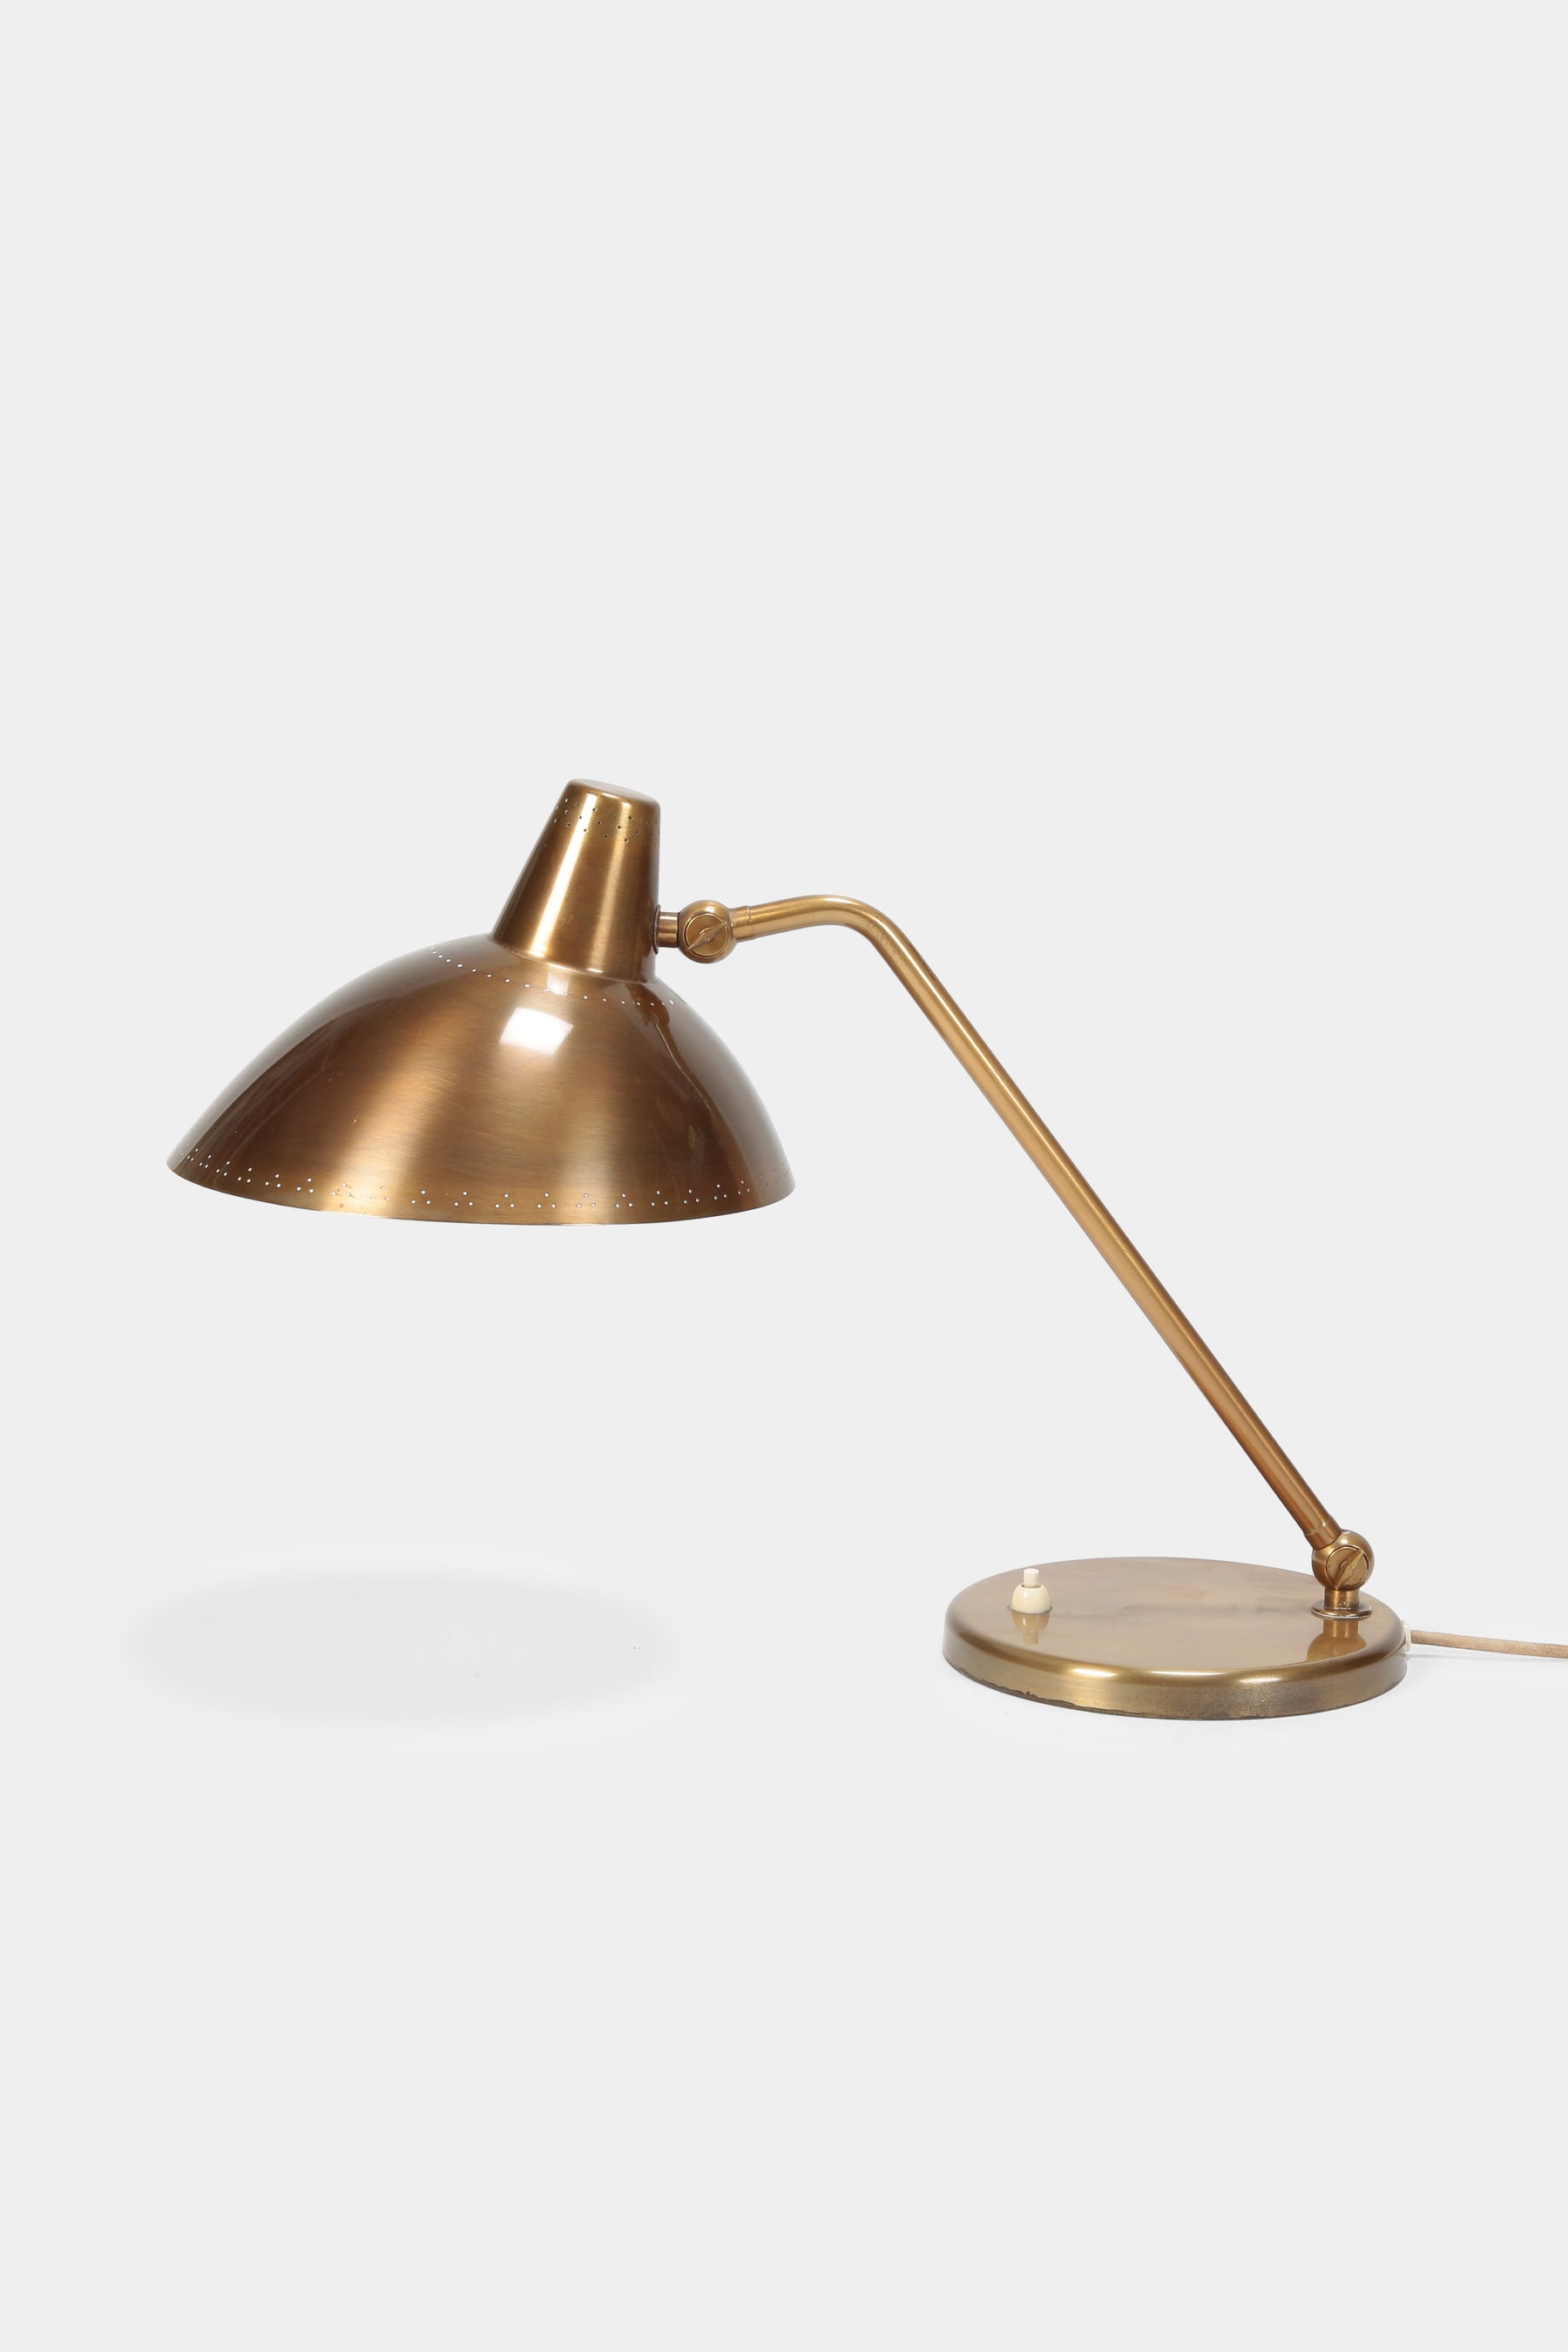 Alfred Müller "Adria" Table Lamp - Model 6420, 50s